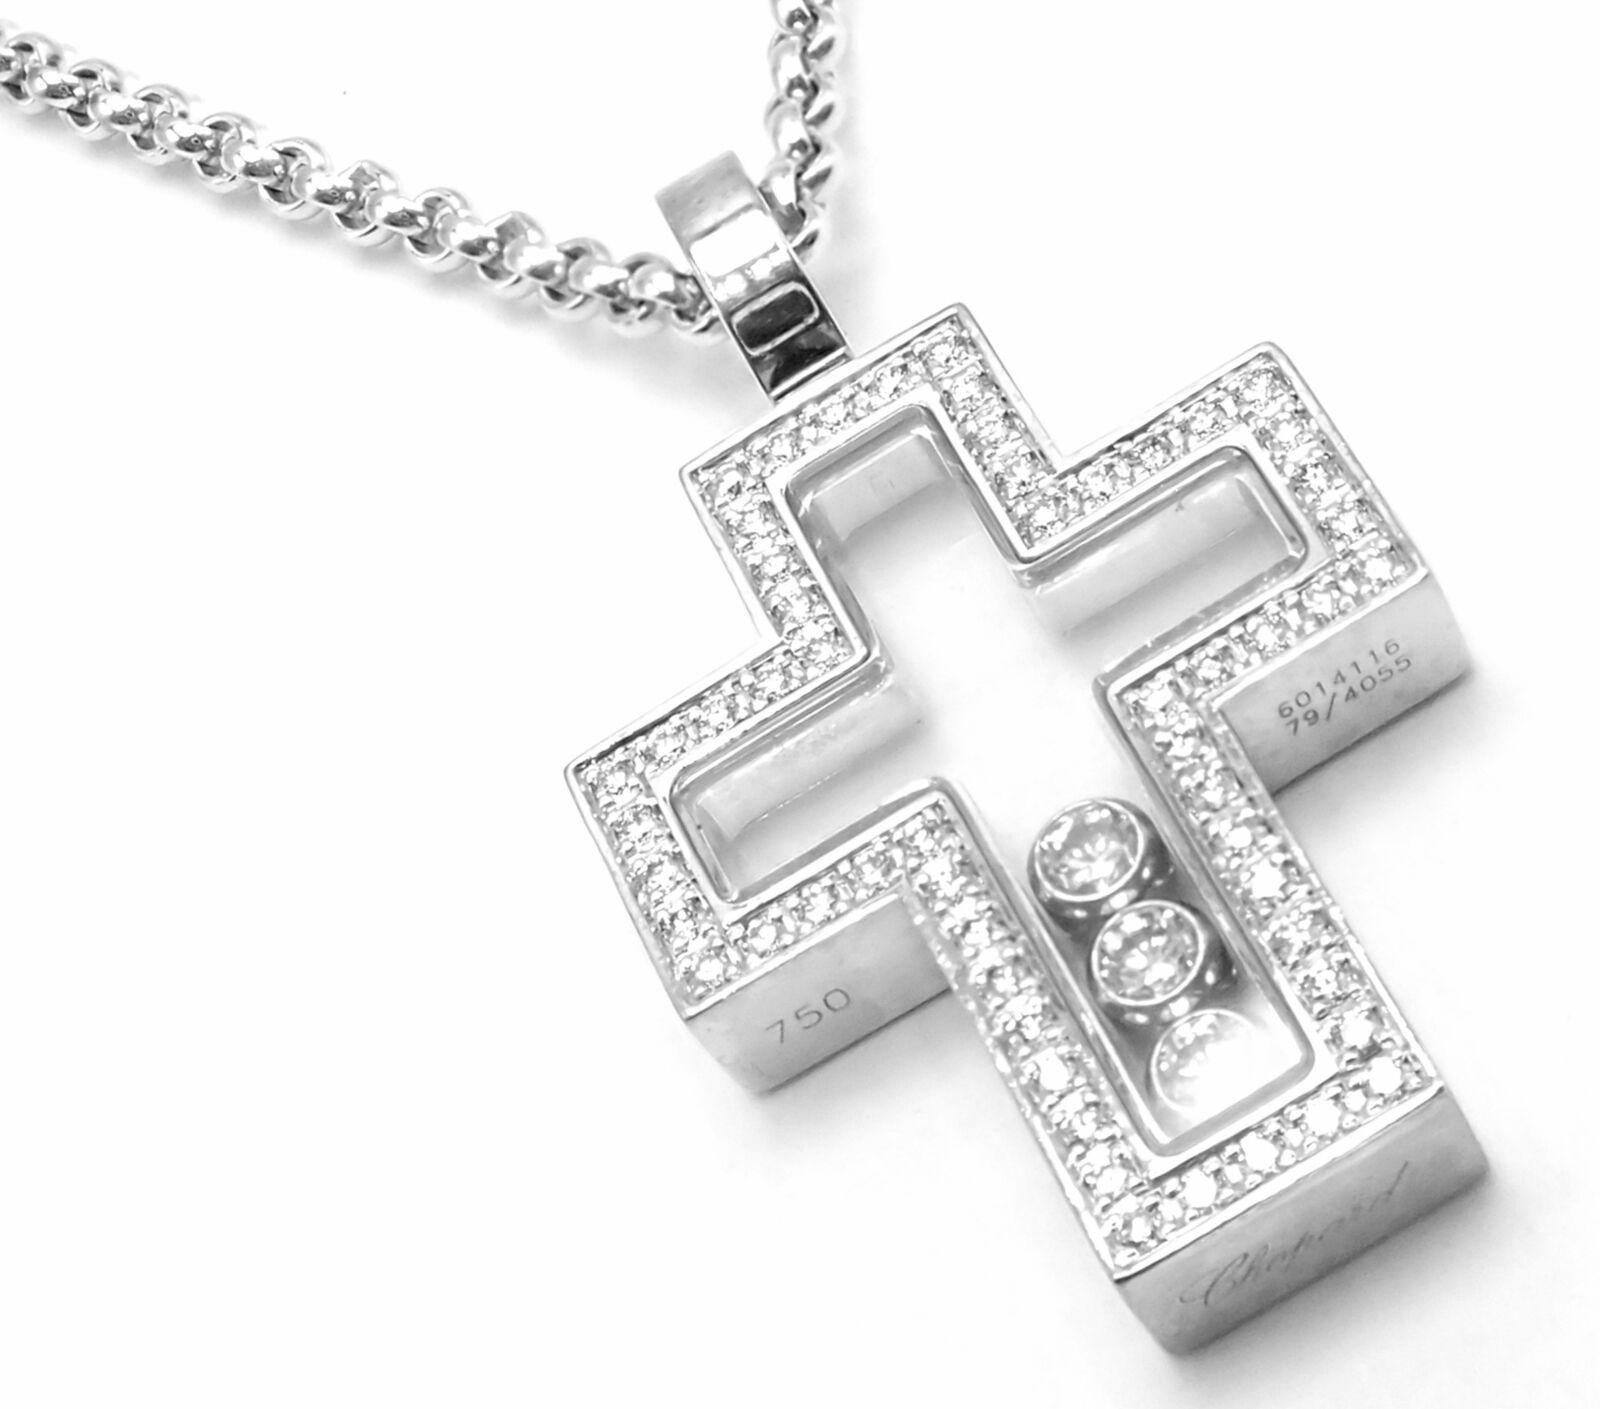 18k Yellow Gold Diamond Happy Diamonds Cross Pendant Necklace by Chopard.  
With Round Brilliant Diamonds = VS1 clarity, G color total weight approximately .38ct
Details:  
Length: 20